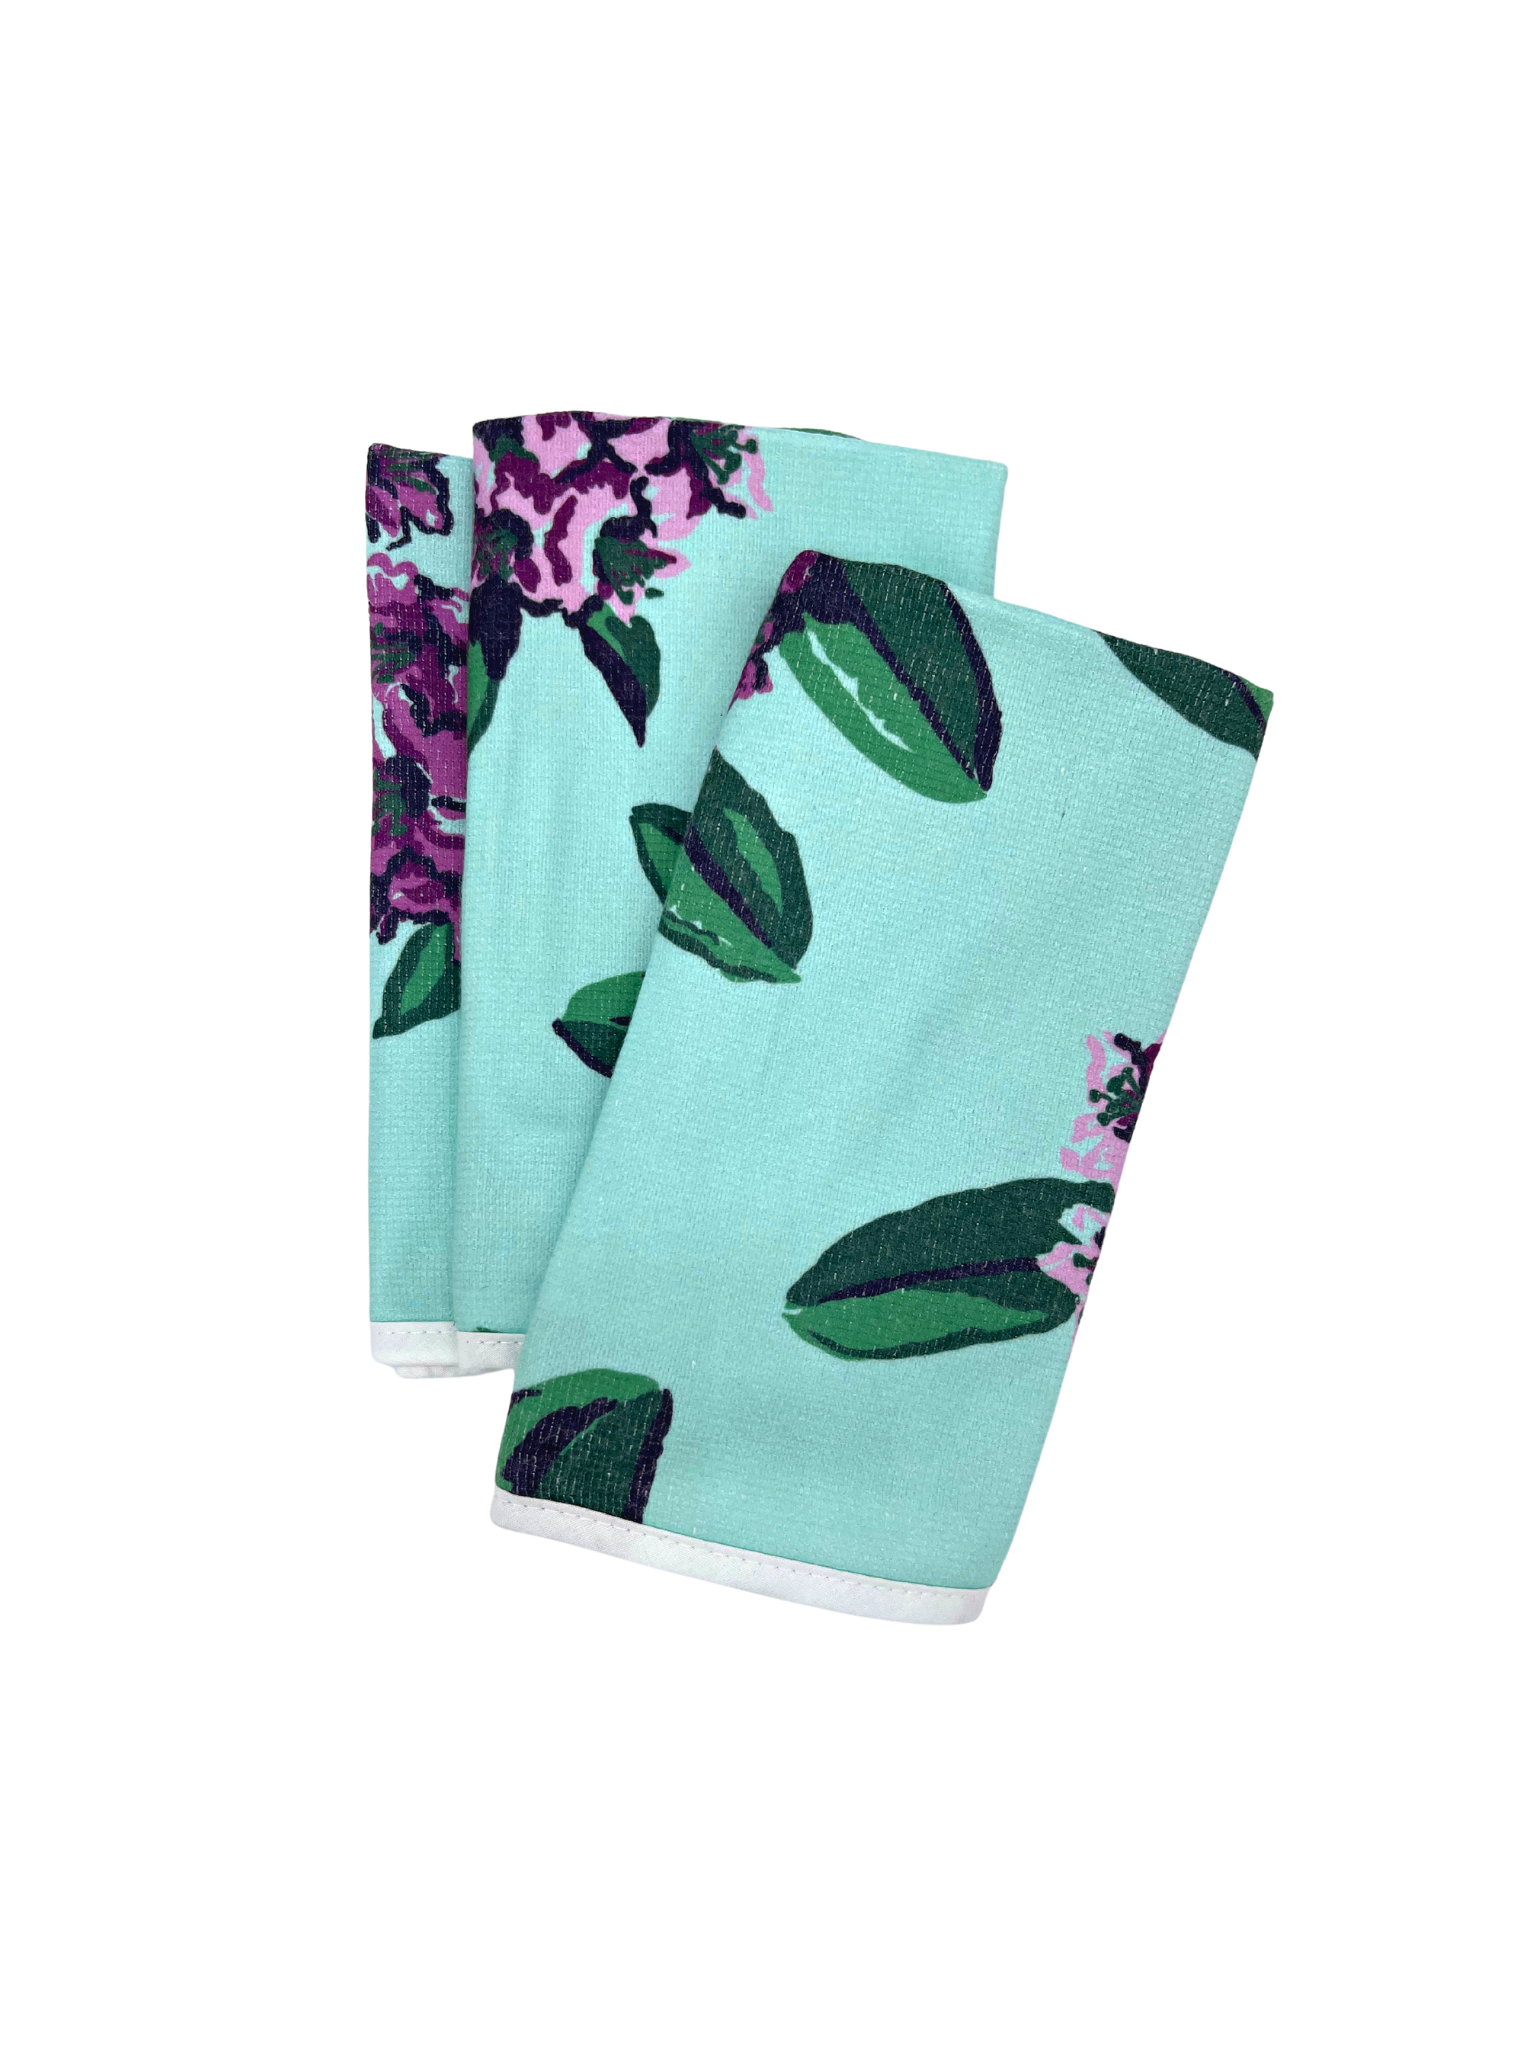 Printed Washcloth/Set of 3 - Rhododendron Mint